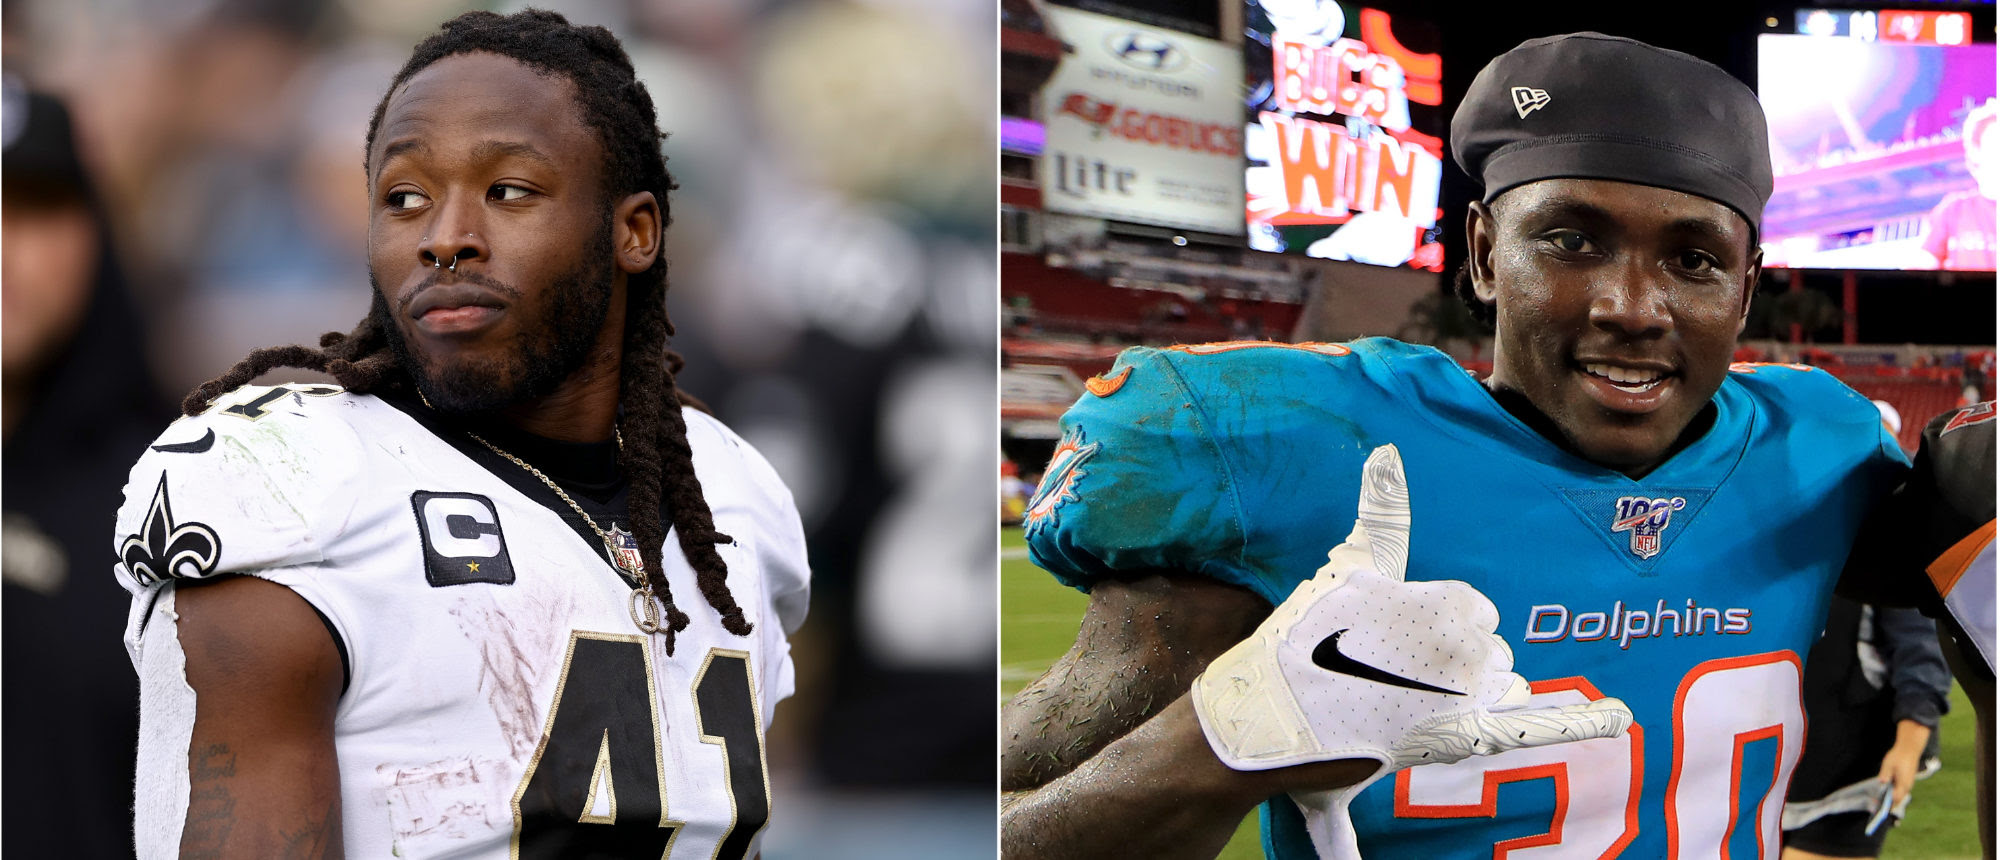 NFL Players Alvin Kamara And Chris Lammons Indicted On Assault Charges